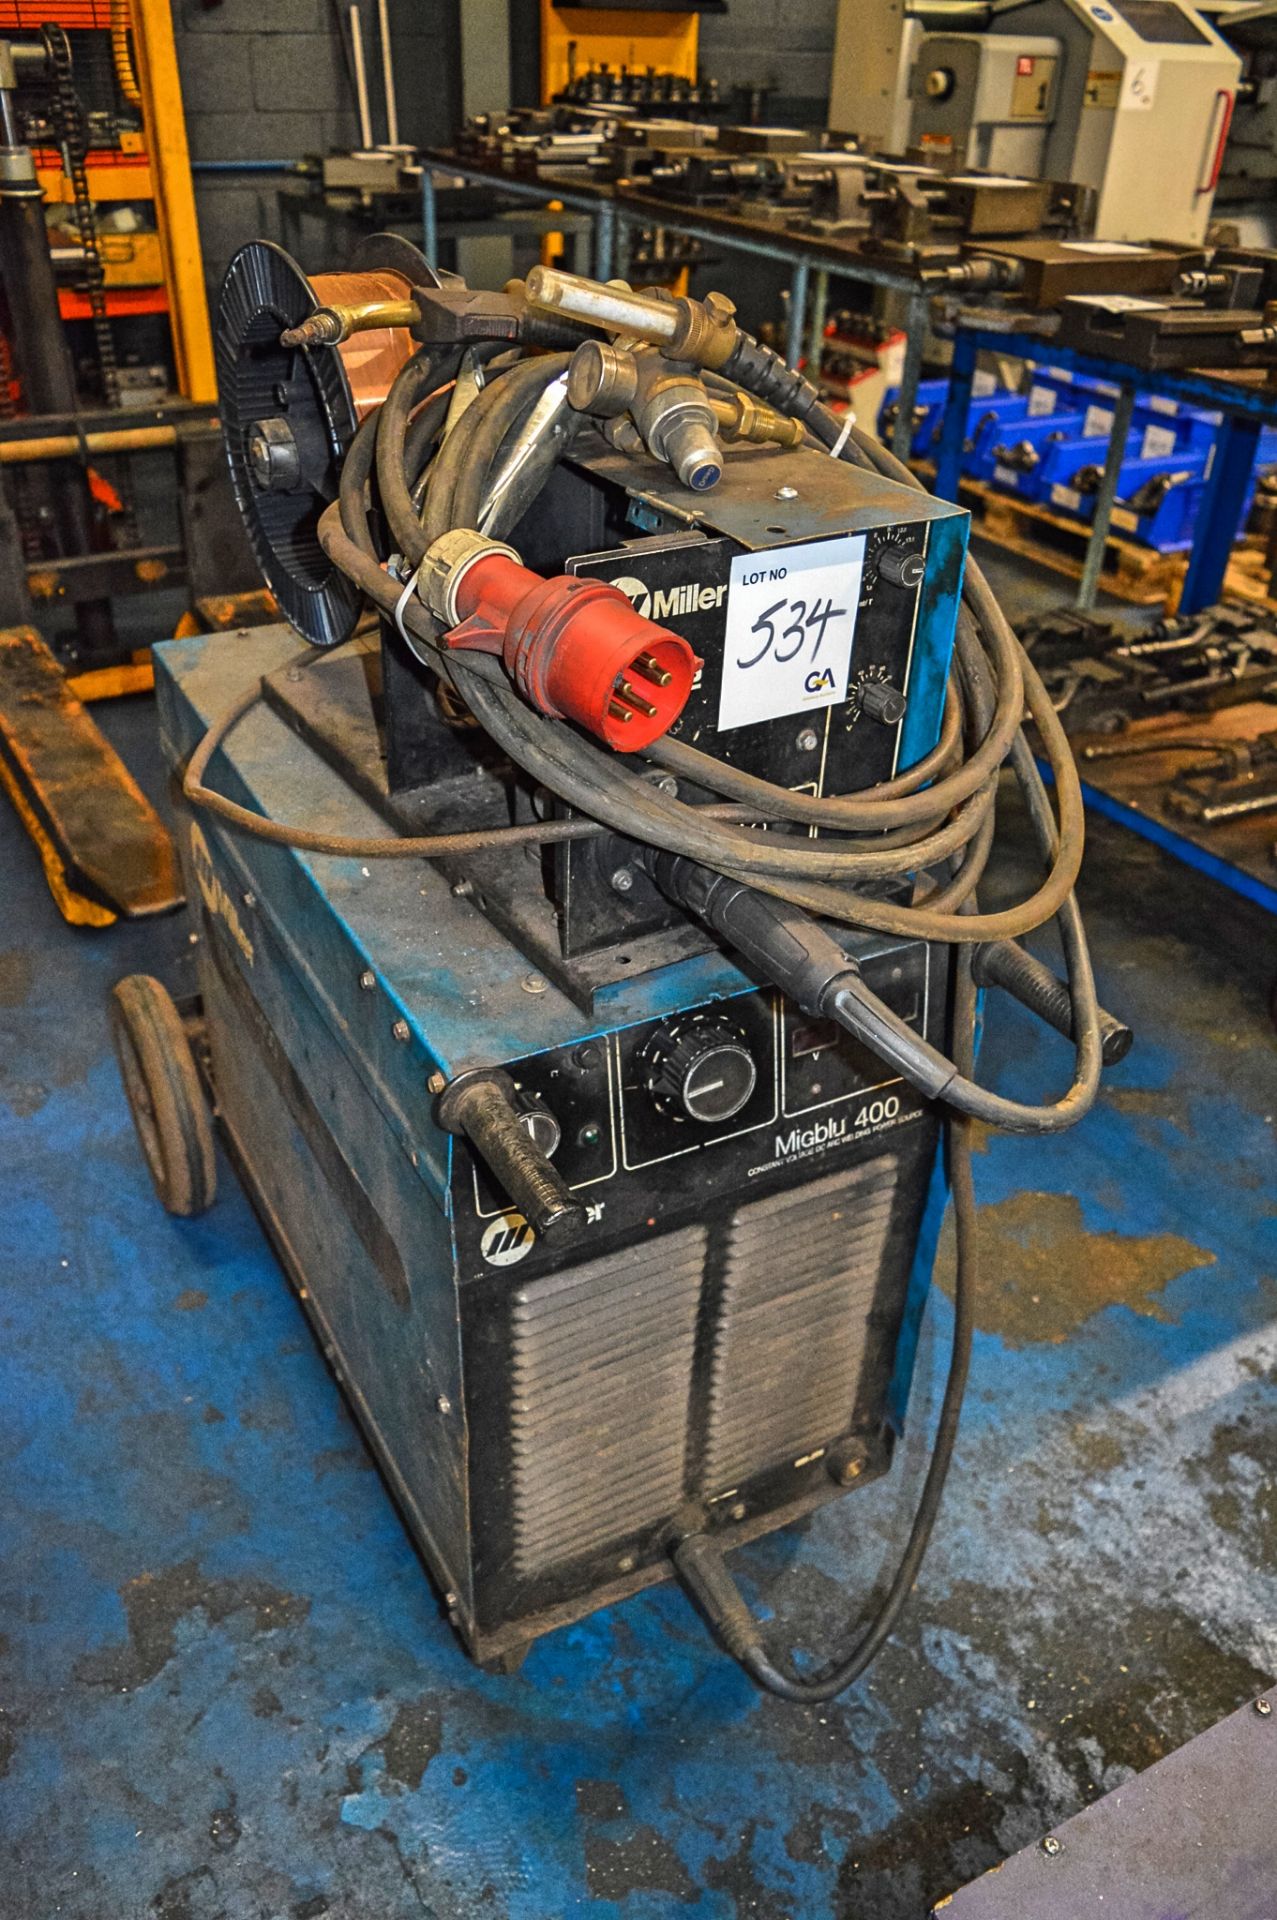 Miller Migblu 400 mig welding set c/w remote wire feed - Image 2 of 2